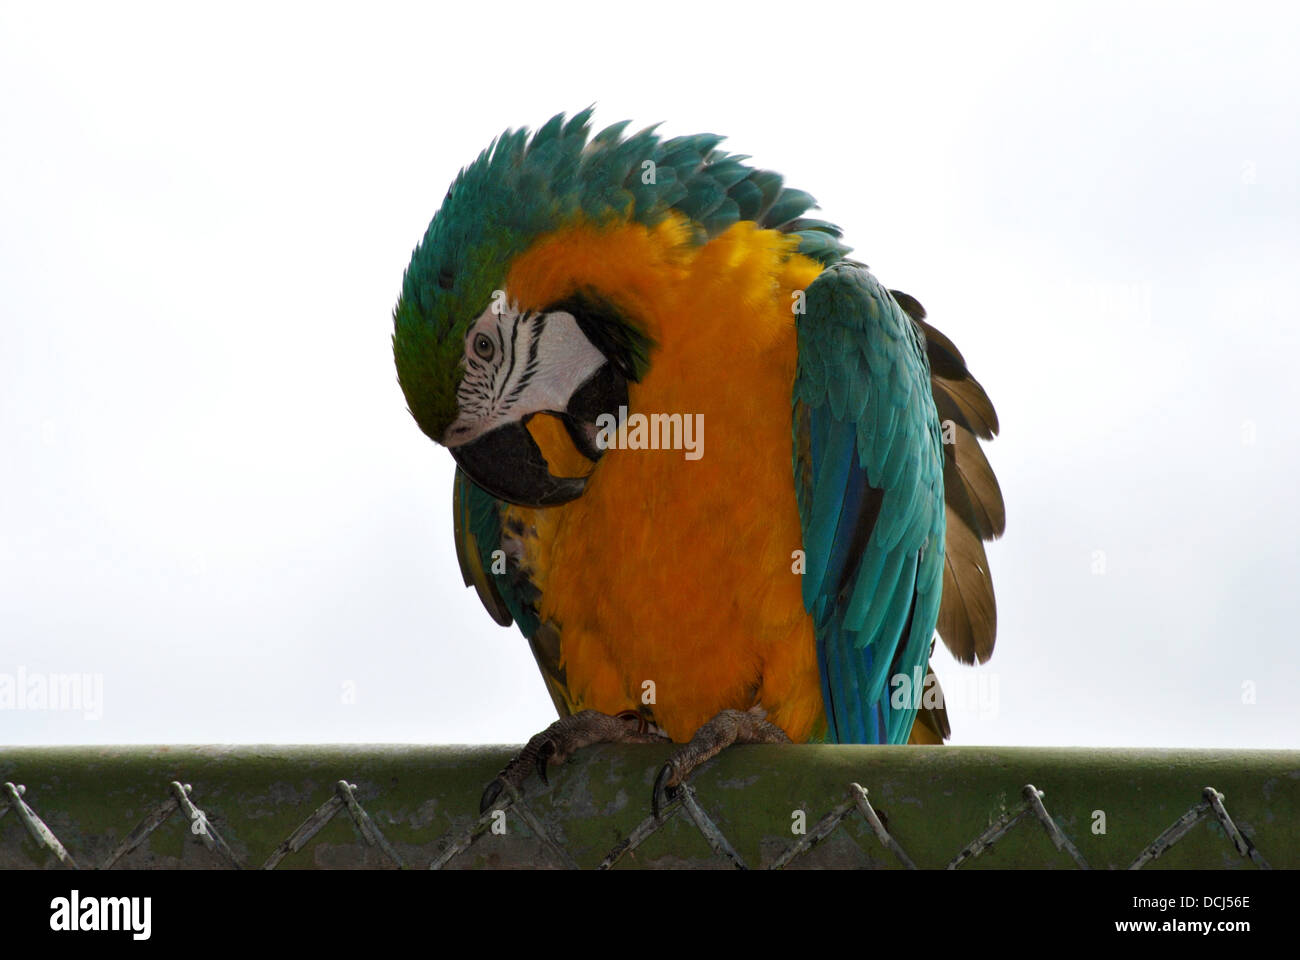 Bright Colored Parrot Sitting on a Fence Stock Photo